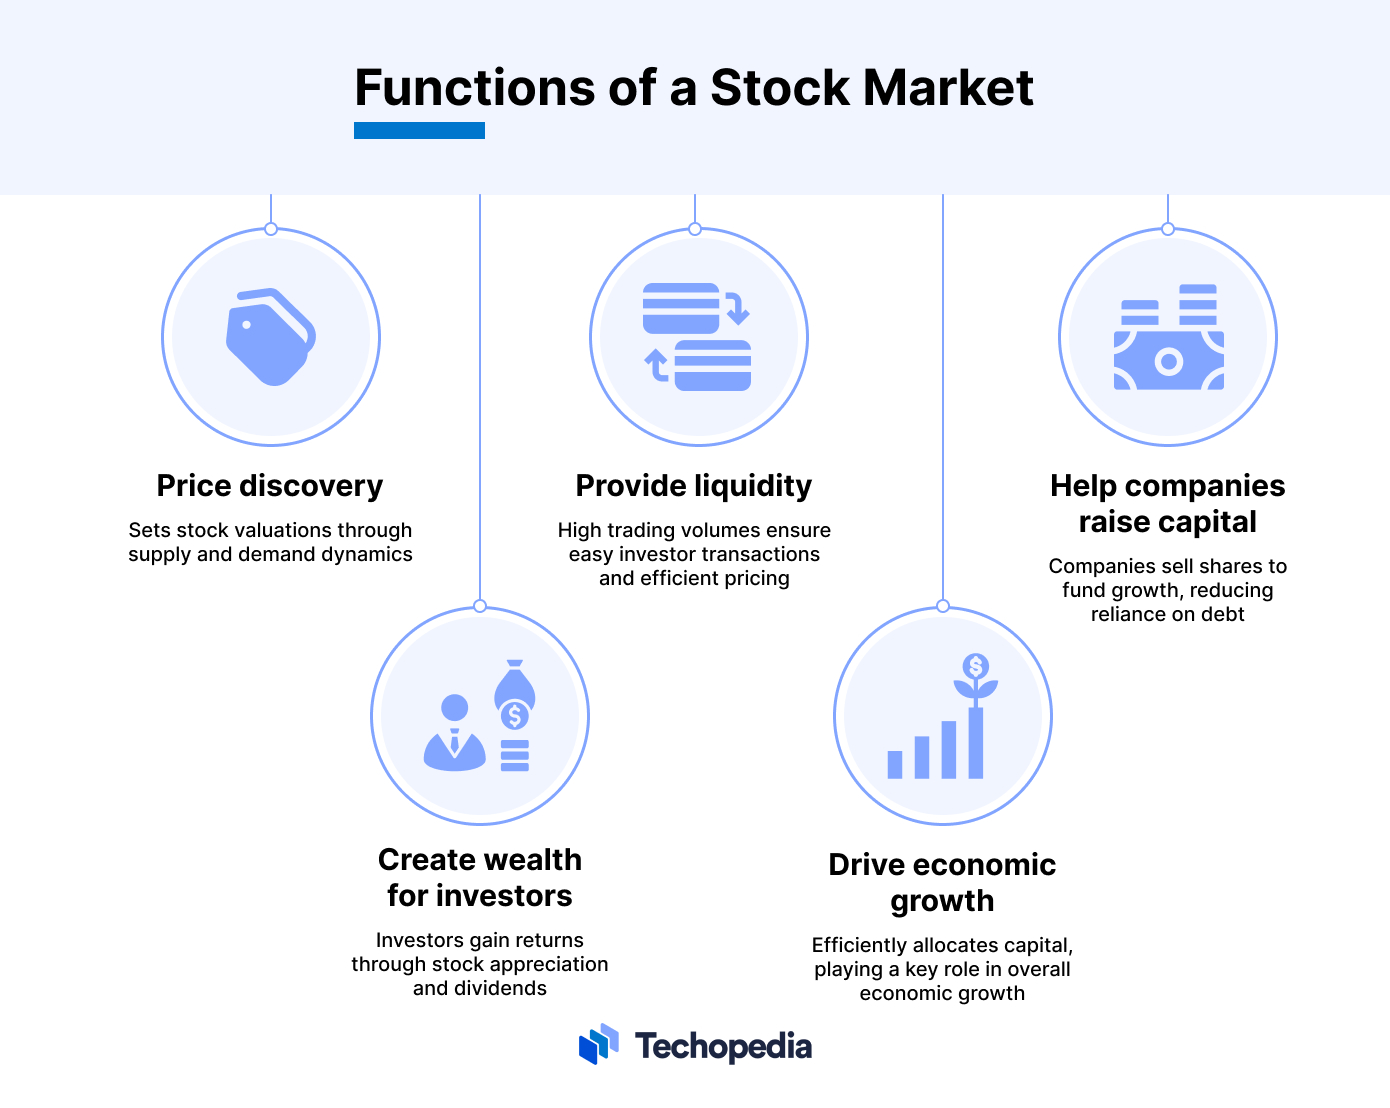 Functions of a Stock Market